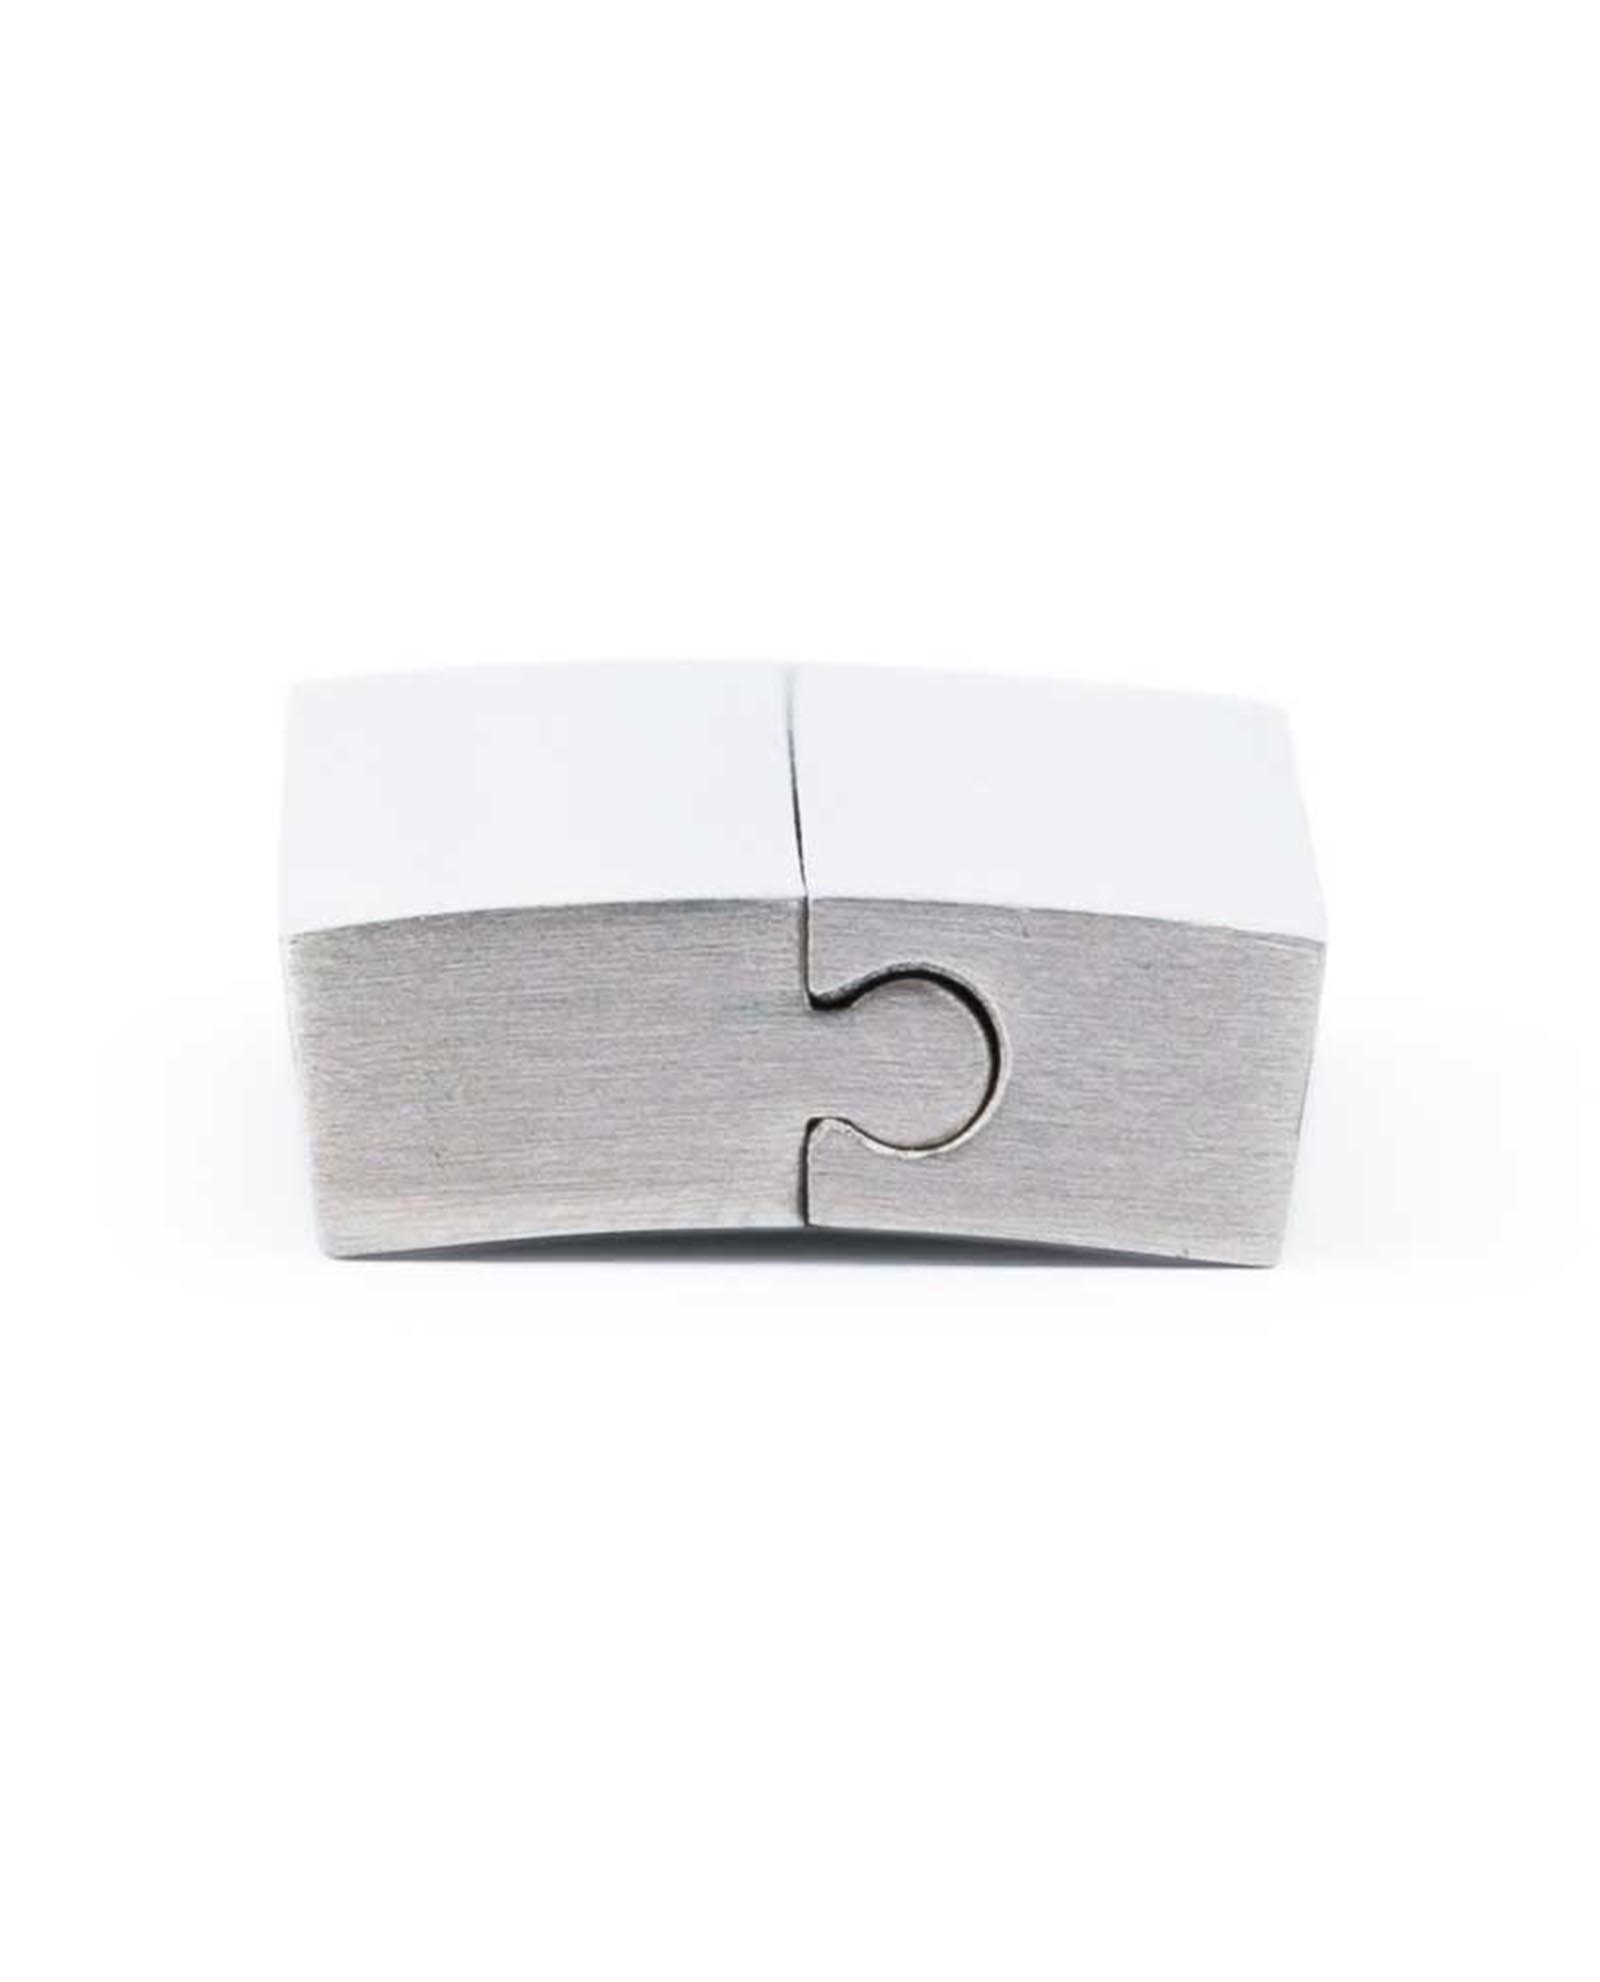 Magnetic Bracelet Clasps For Leather, Stainless Steel 15mm